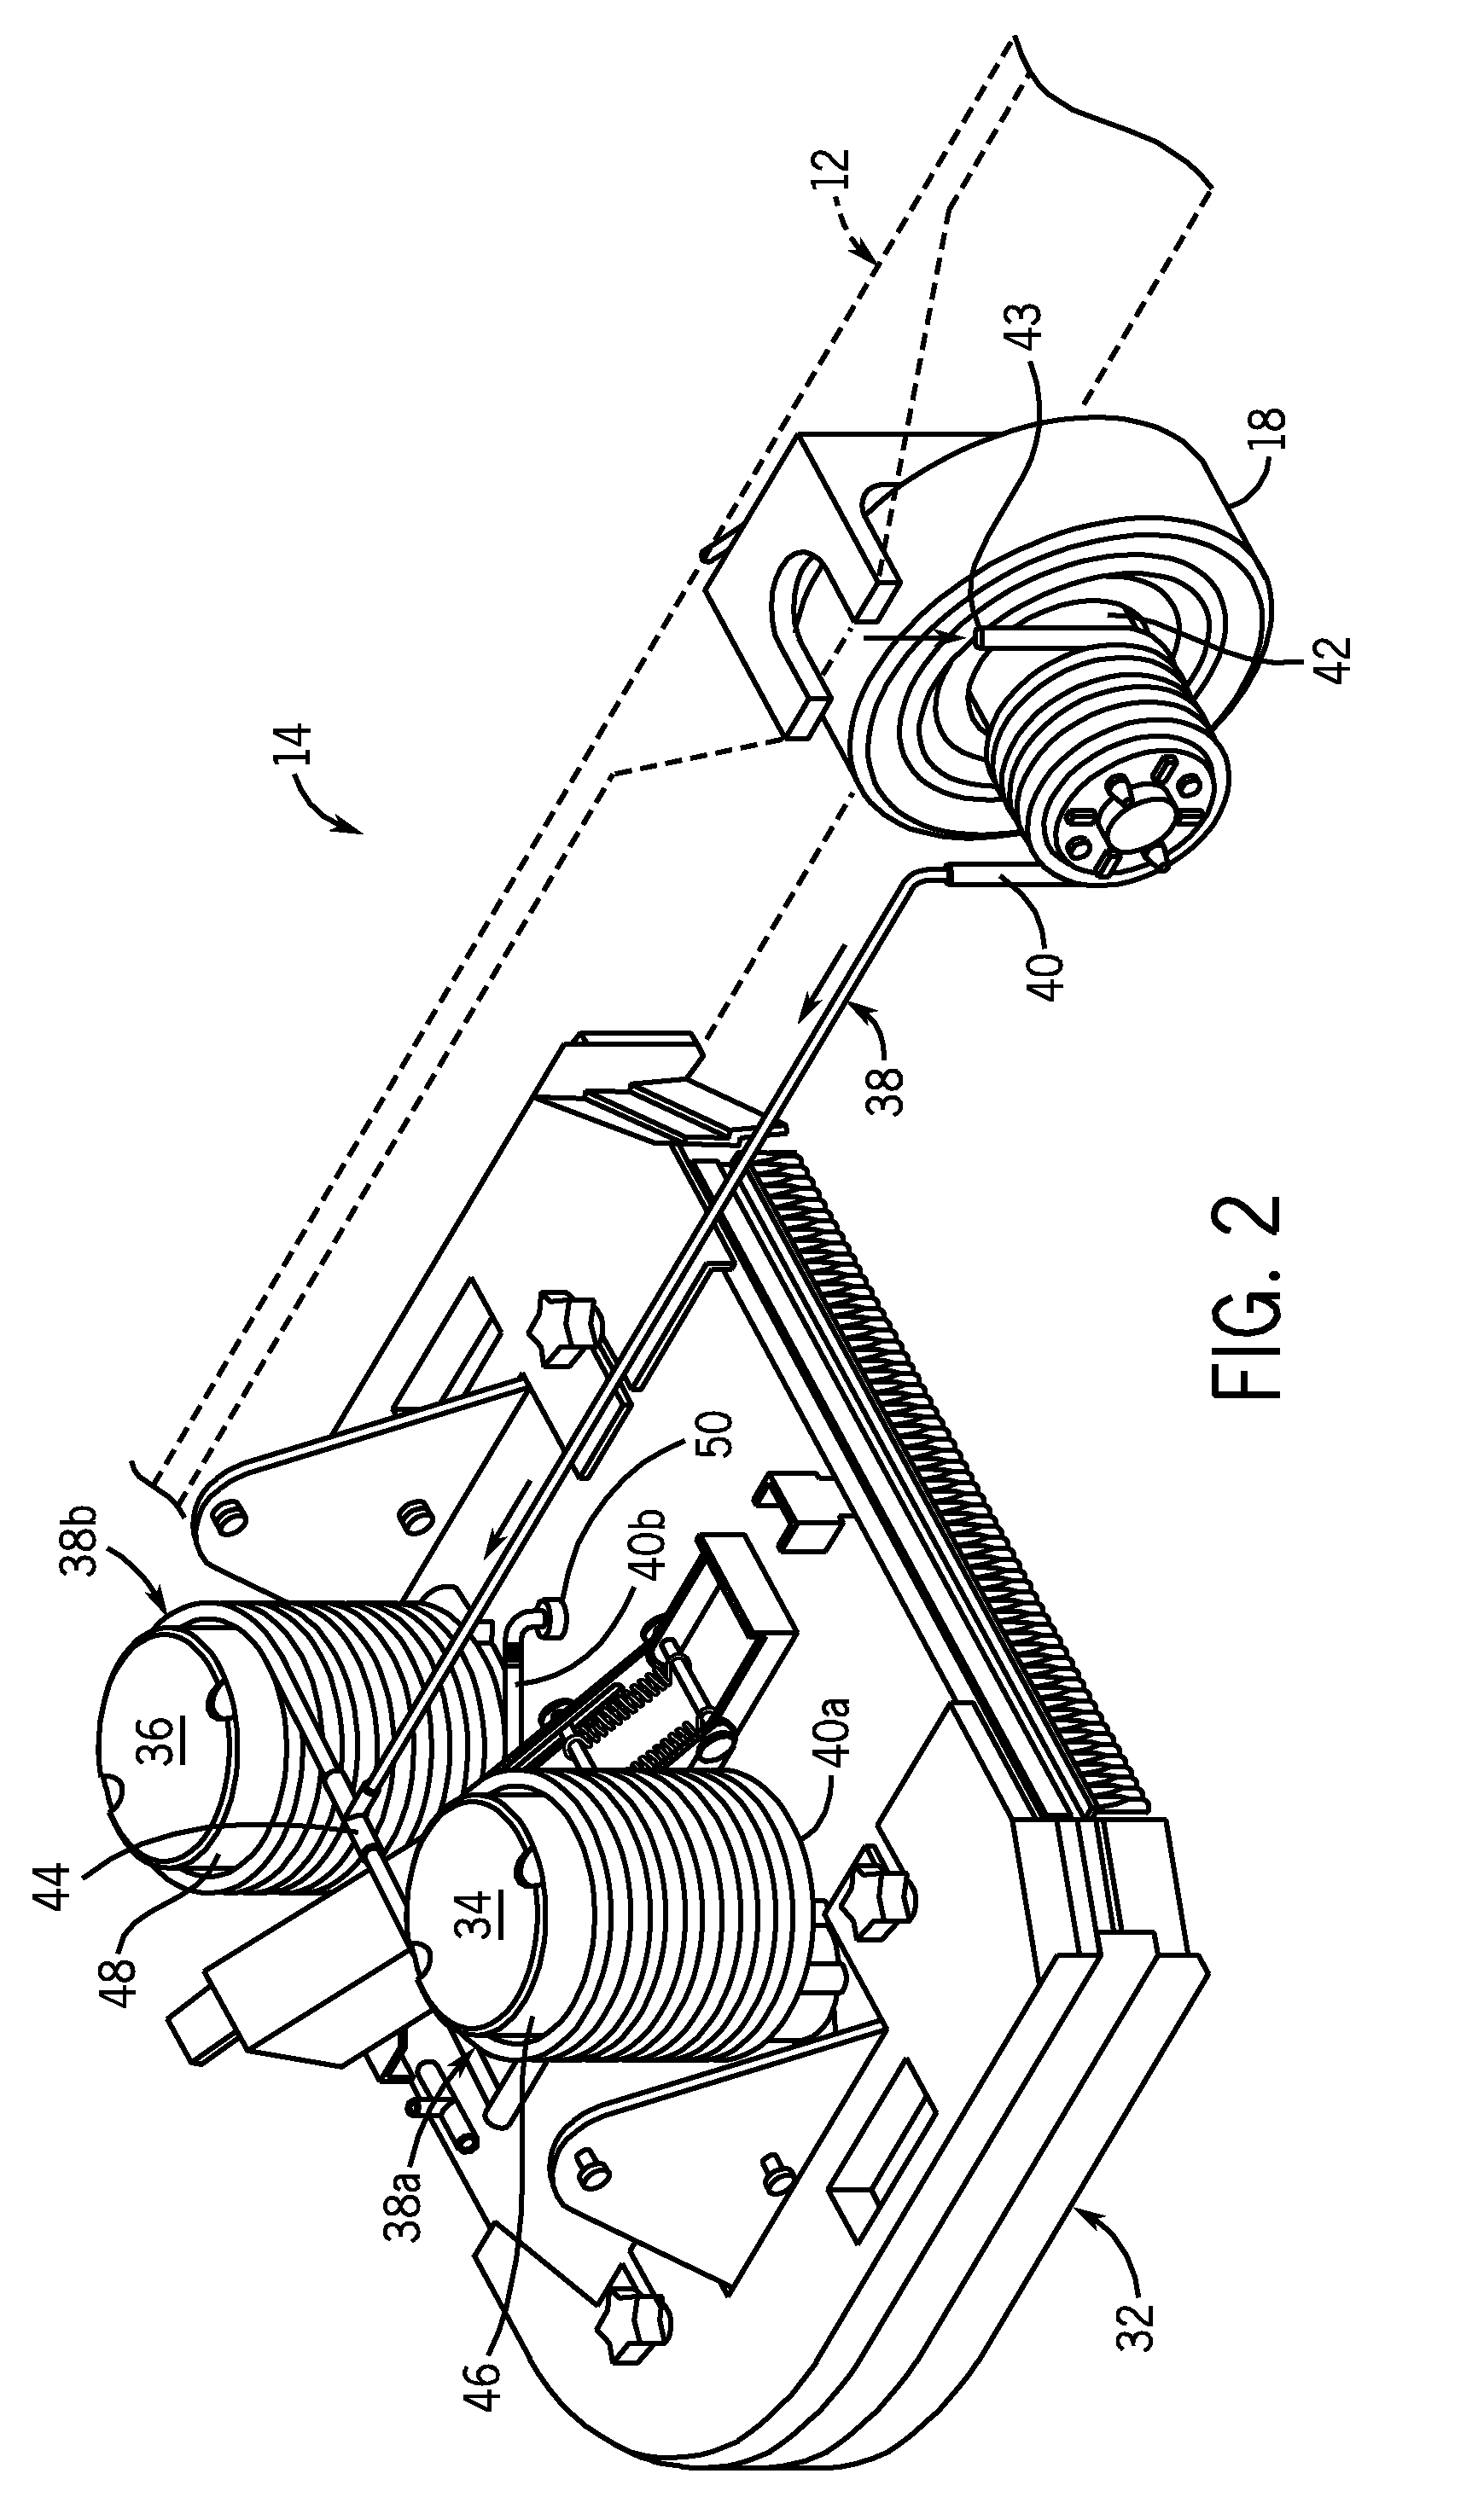 Fluid heating system for a cleaning device